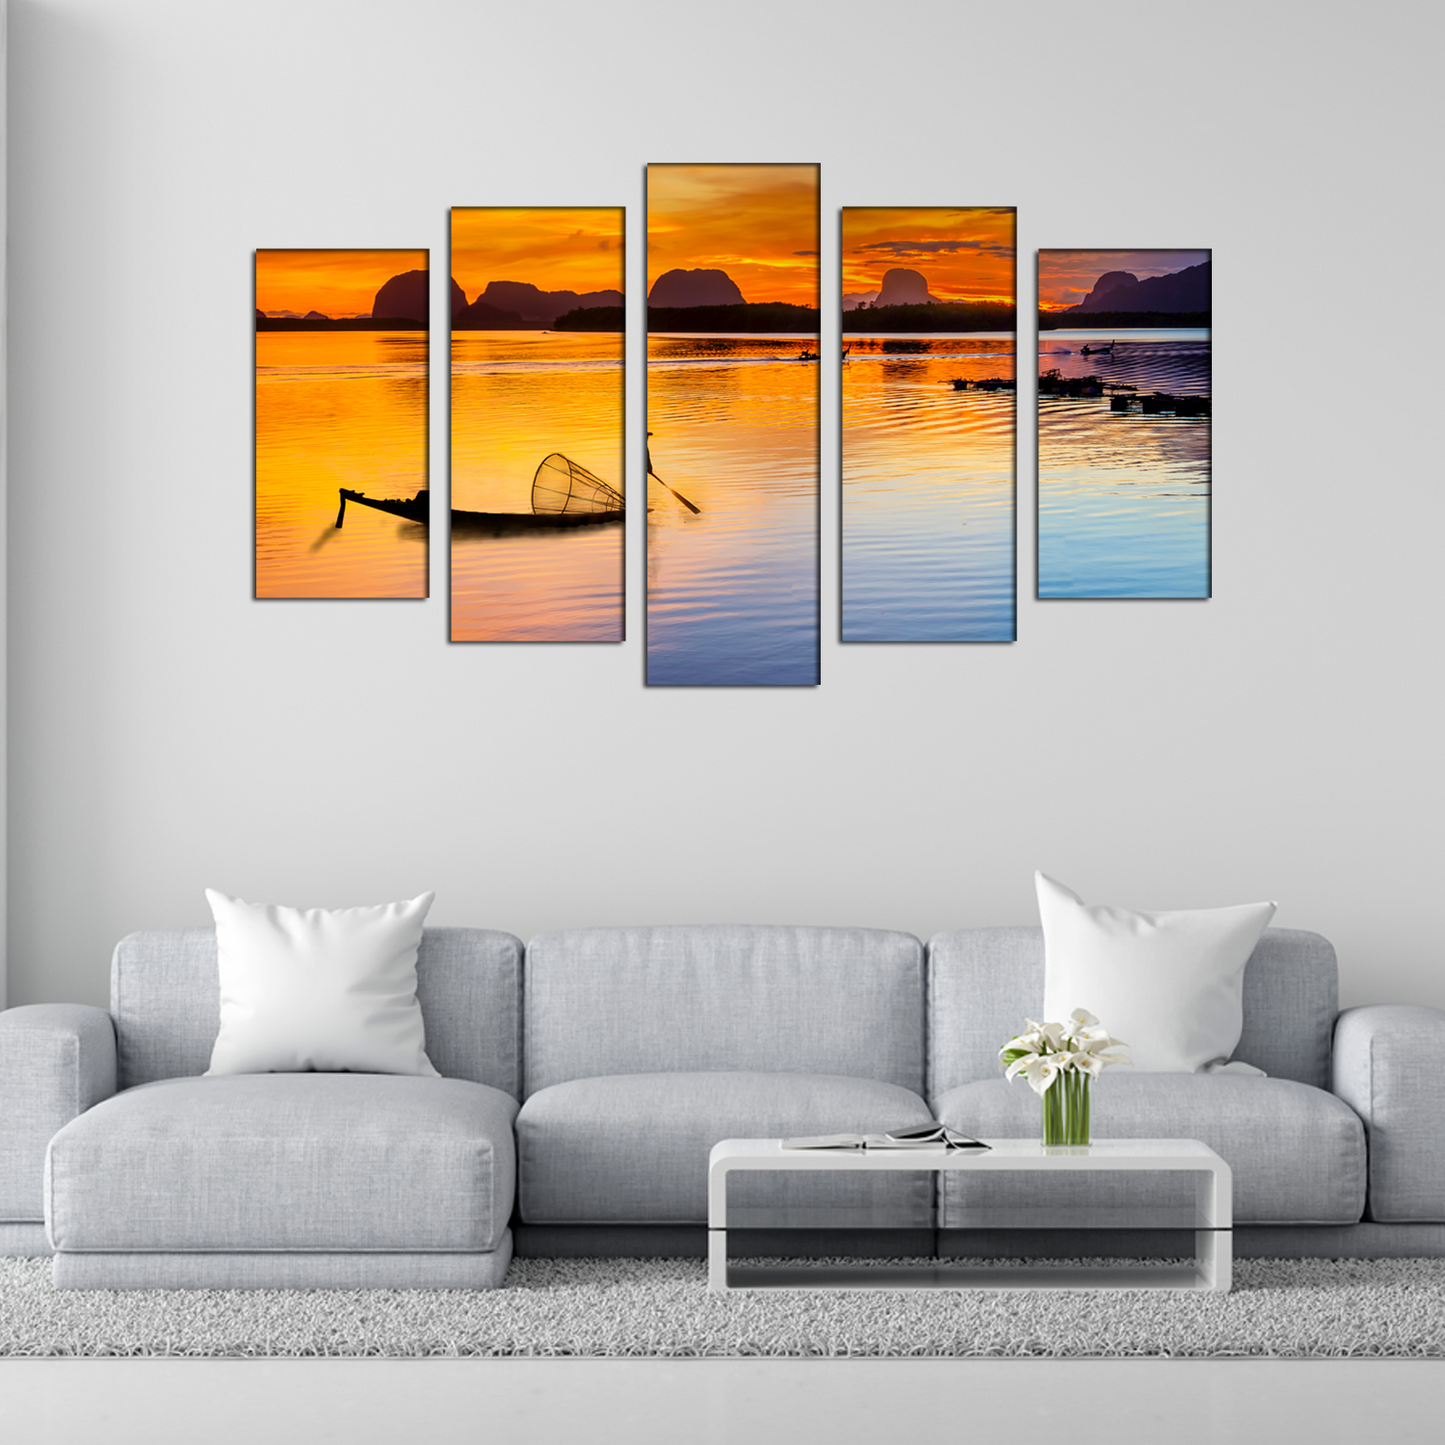 Sunset River View MDF Panel Painting